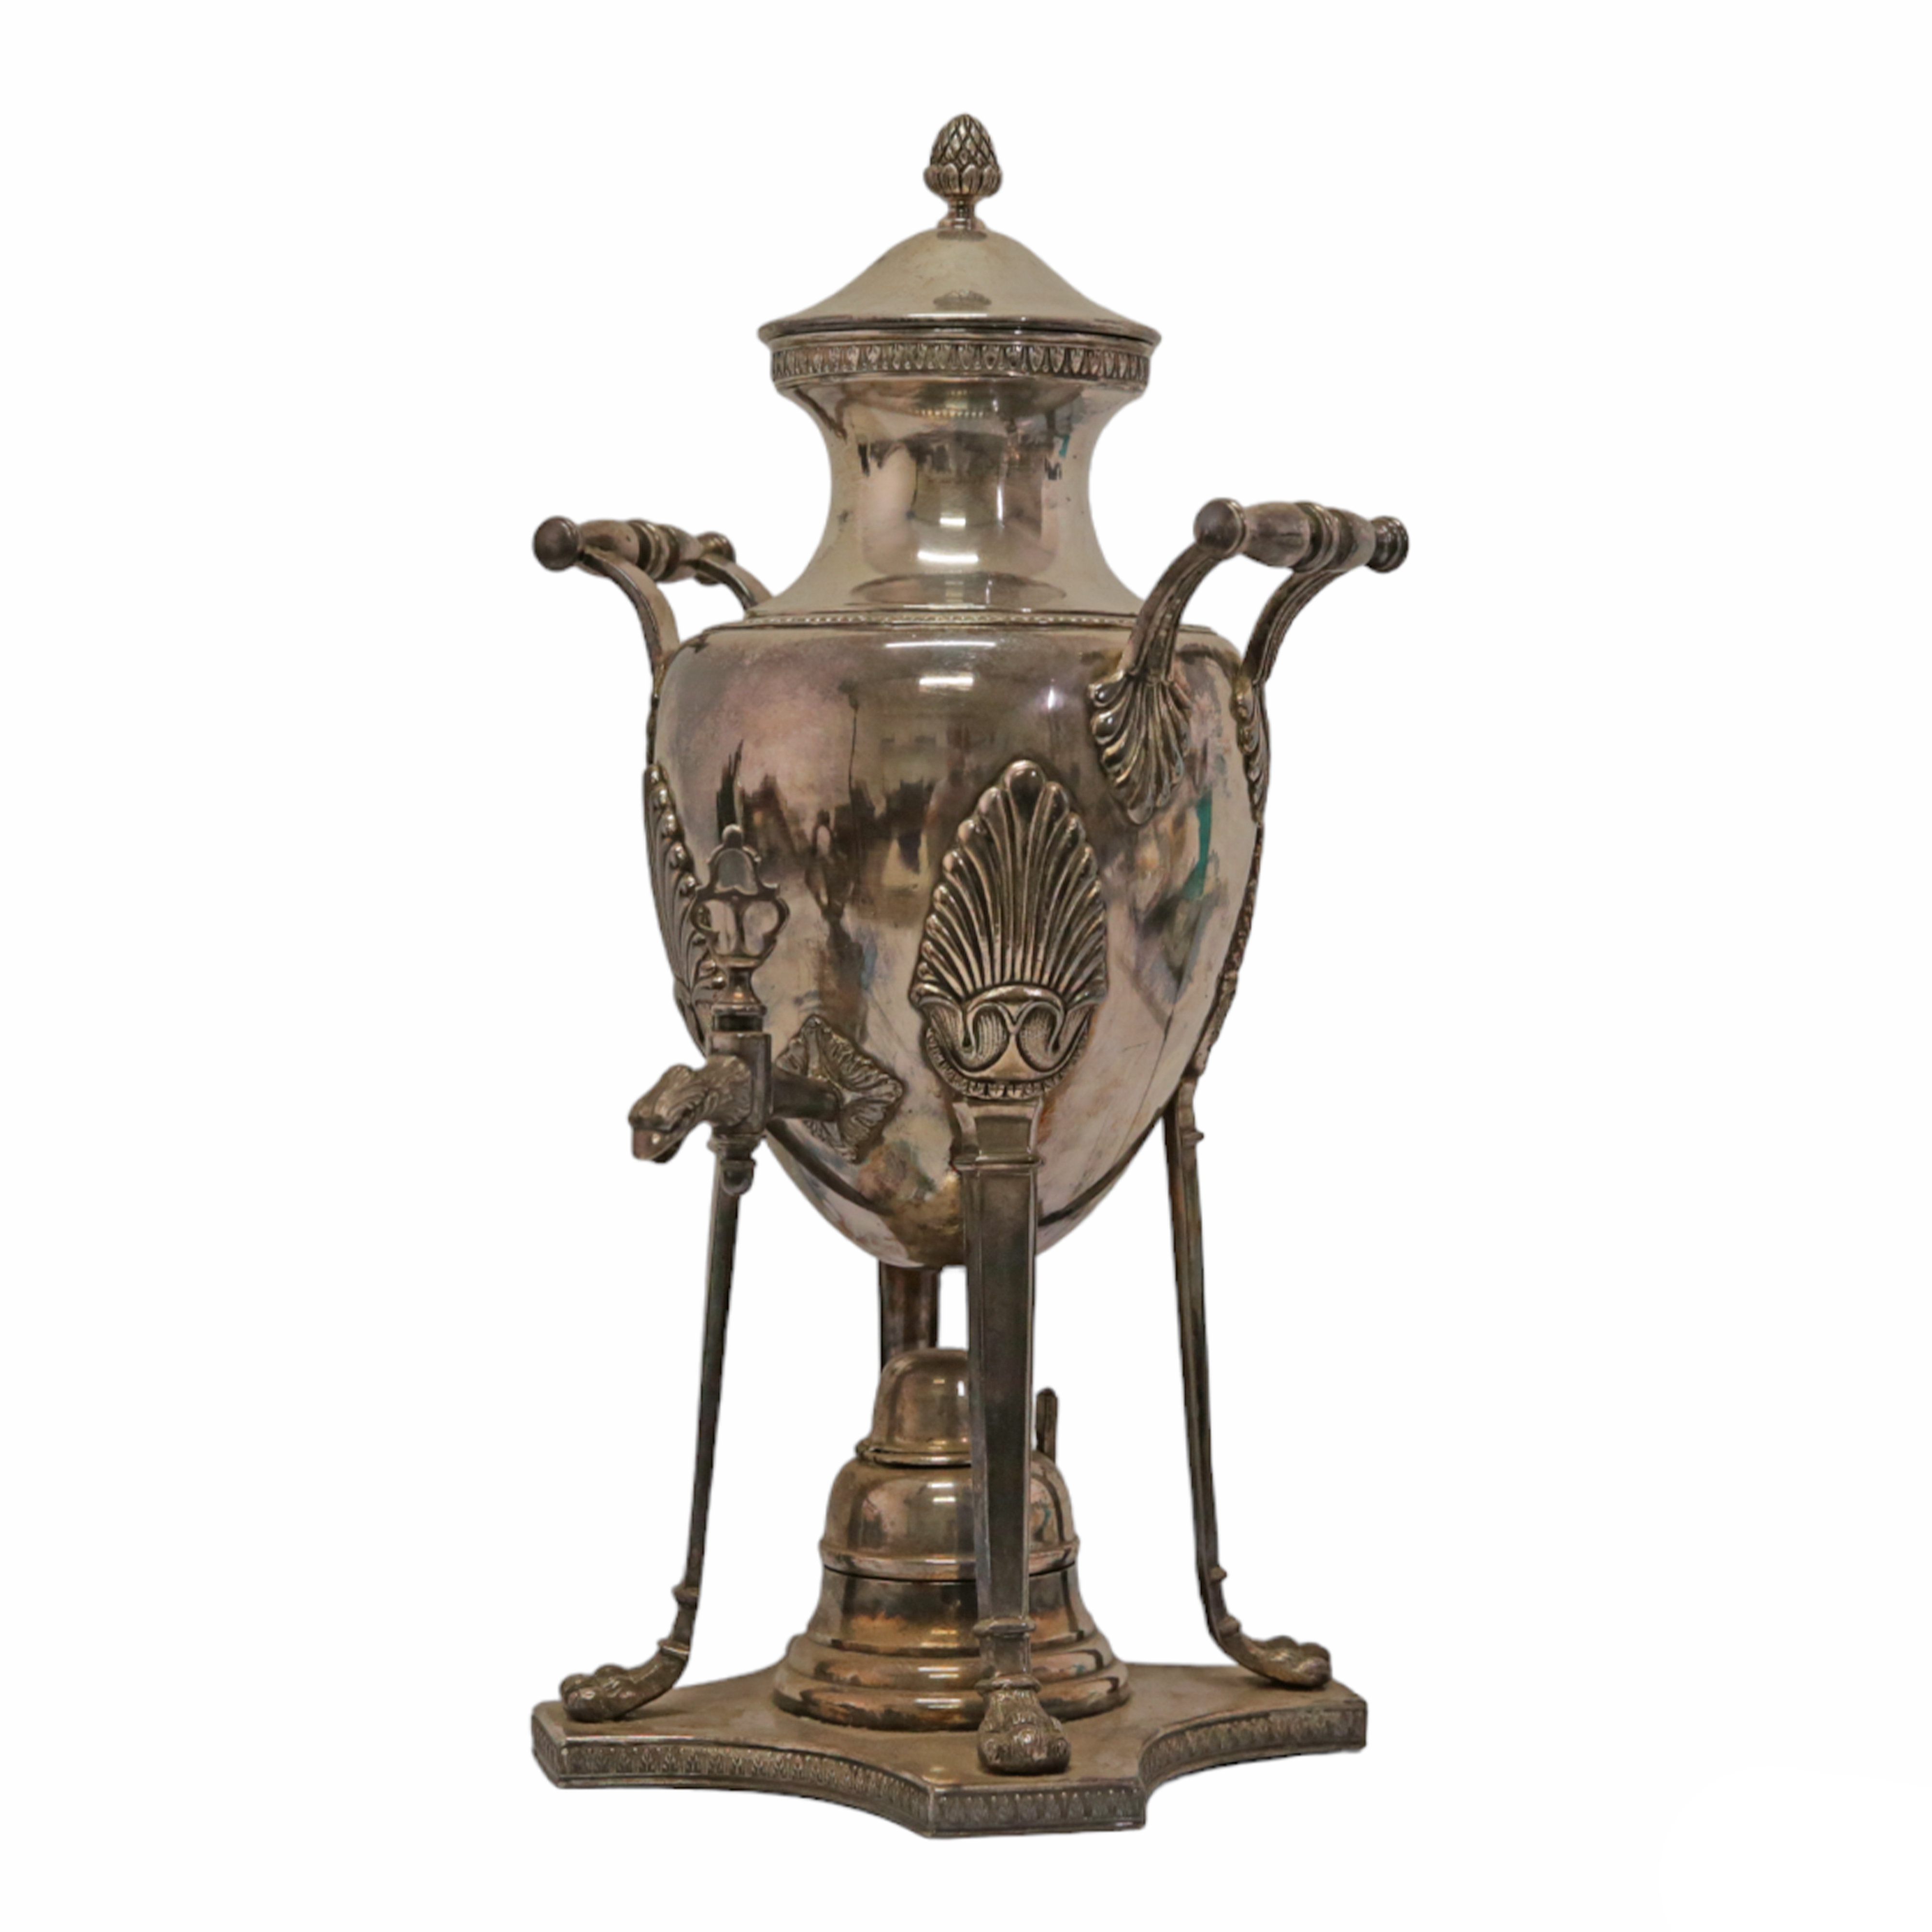 Rare Silver Plate Samovar, Large coffee urn with Neoclassical motifs, France 19th century. - Image 3 of 11